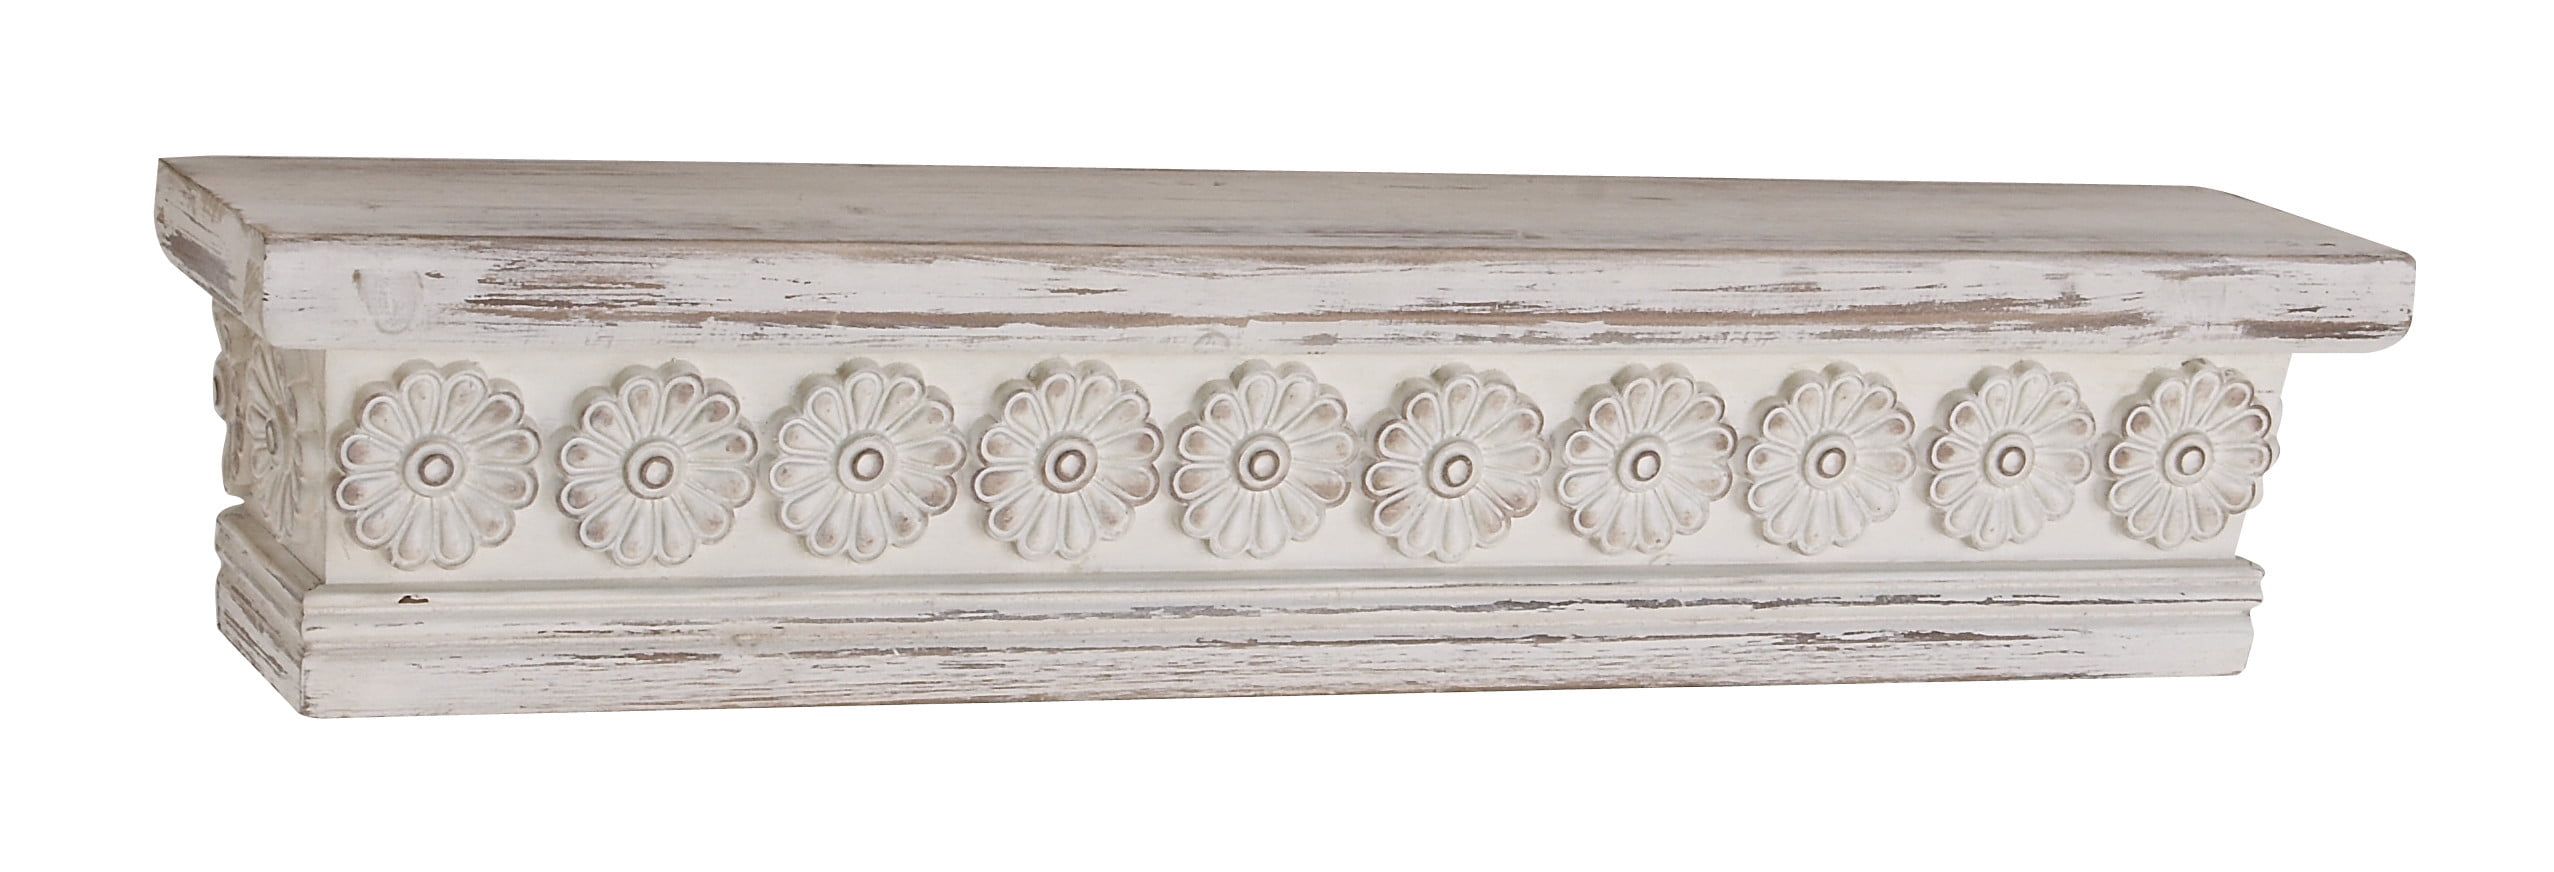 Charming White Wood Floating Wall Shelf with Floral Carving, 39"